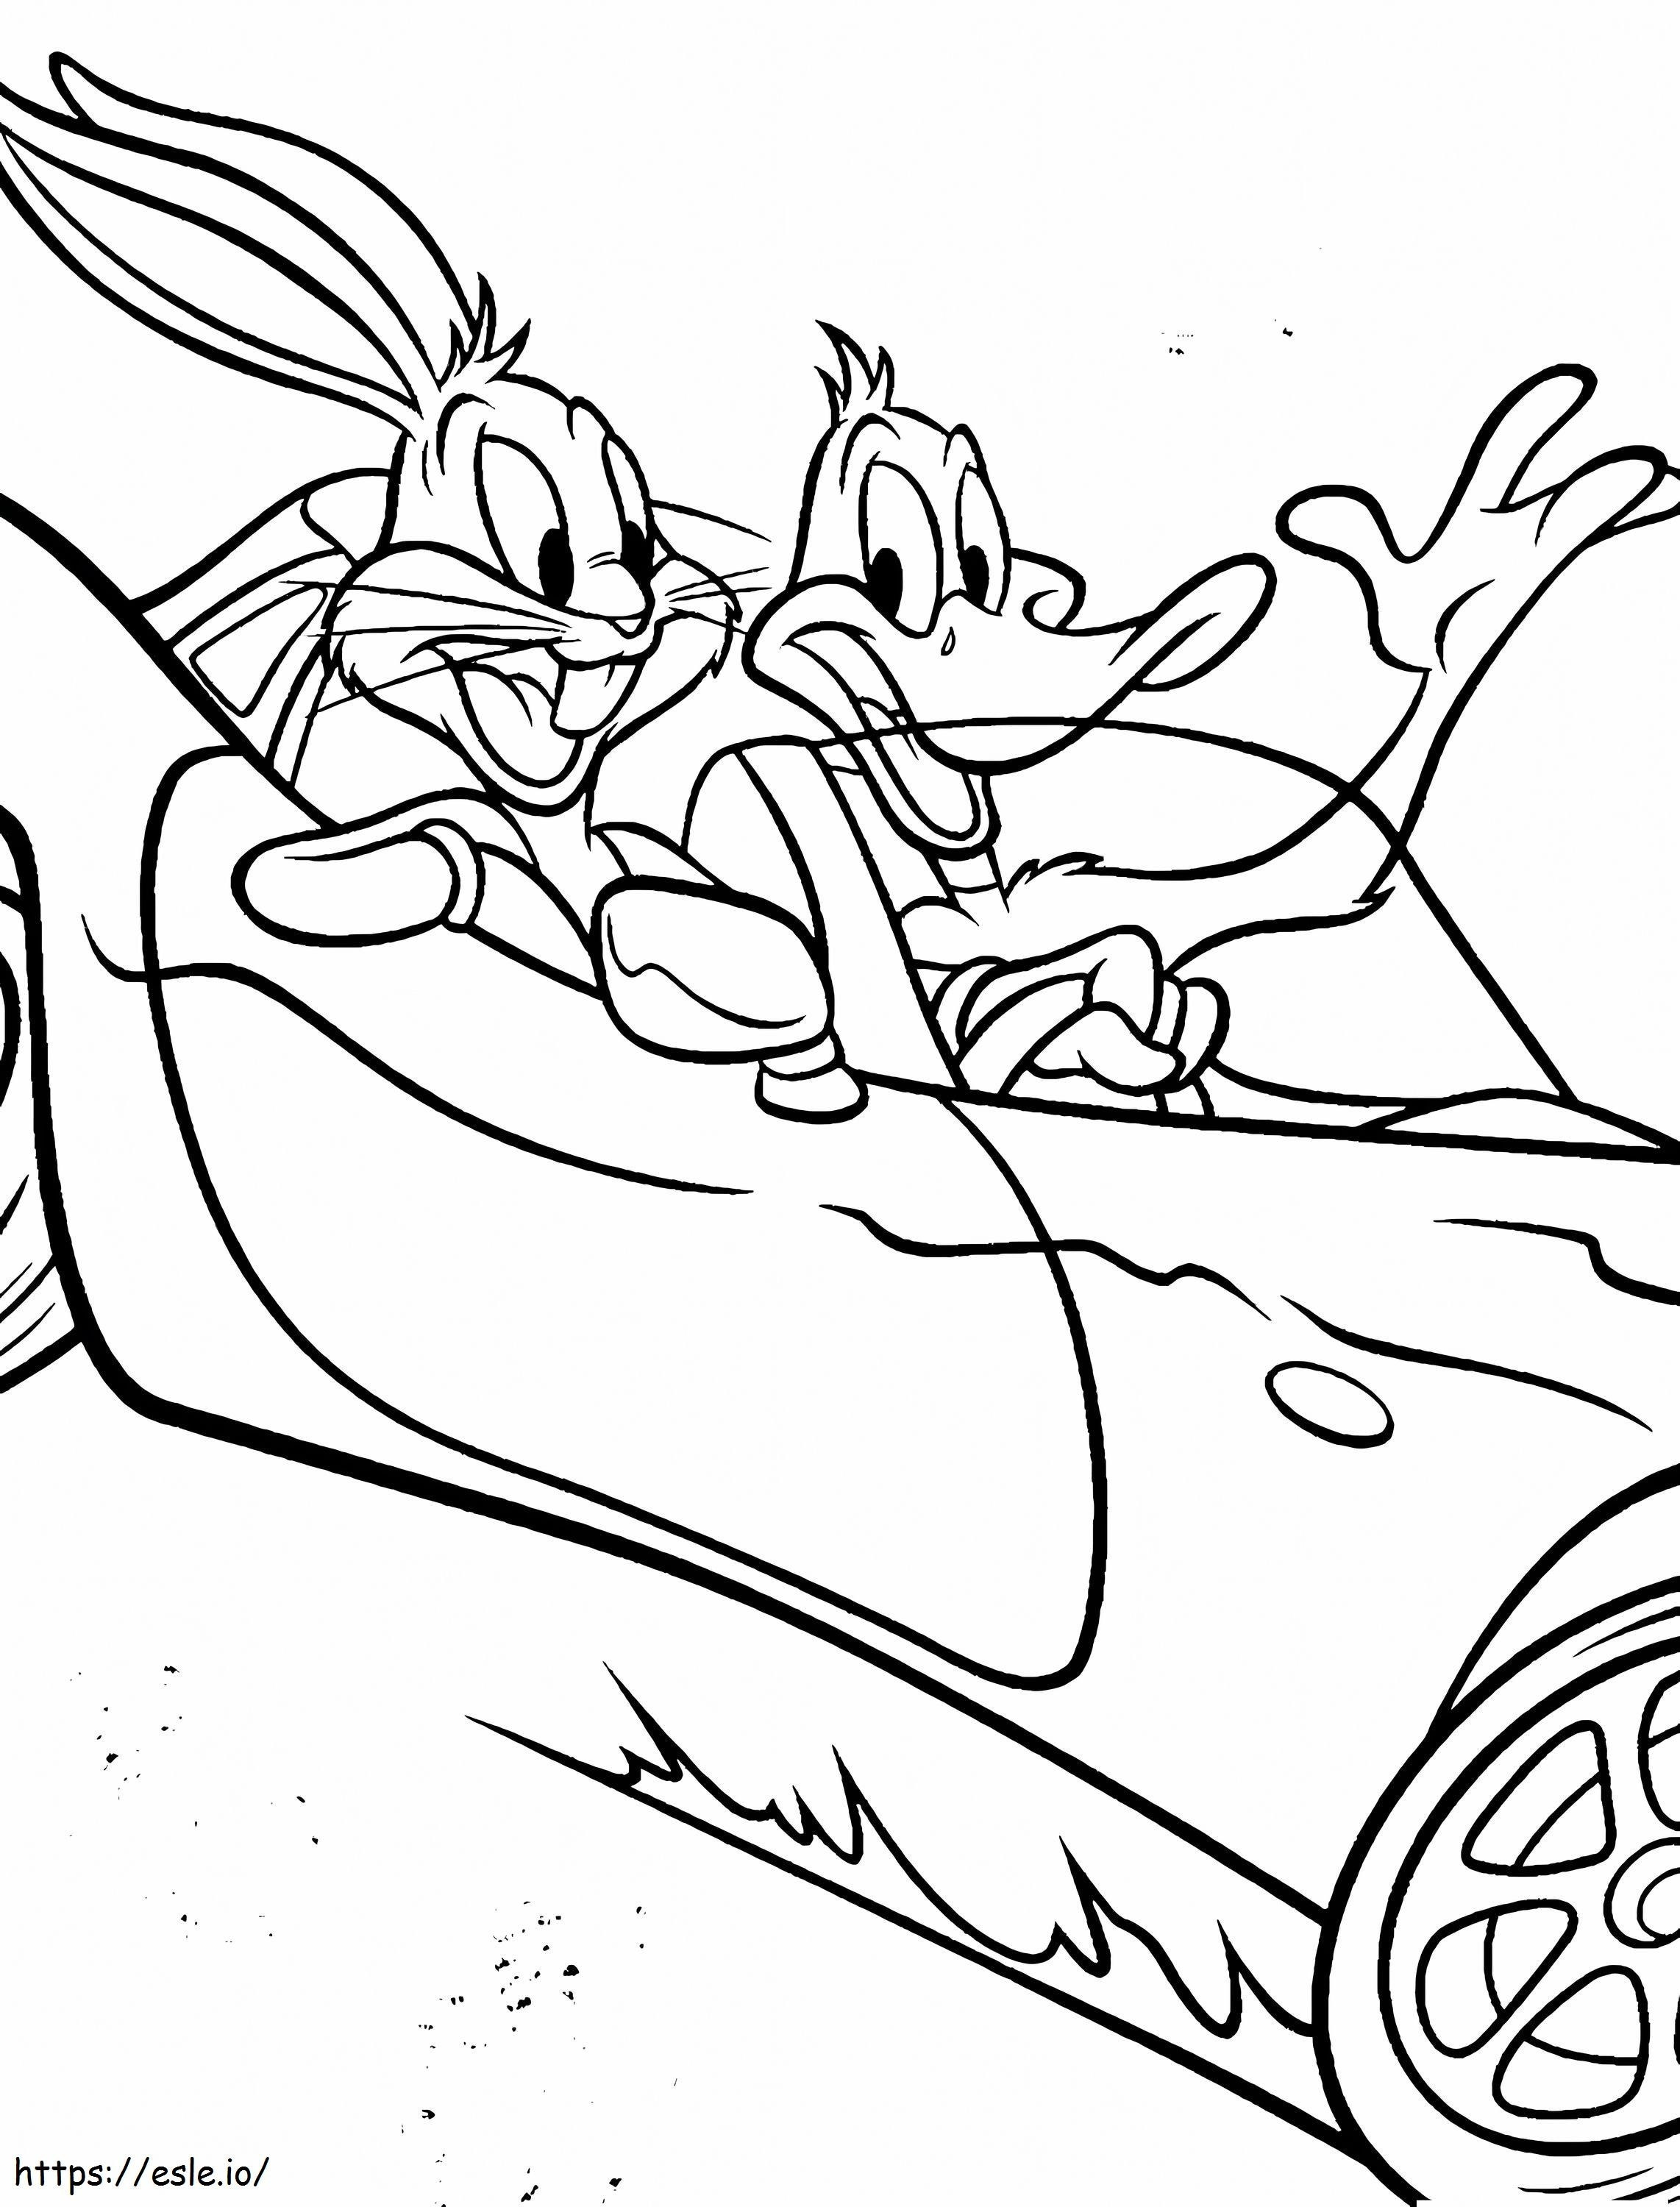 Daffy Duck And Bugs Bunny In The Car coloring page